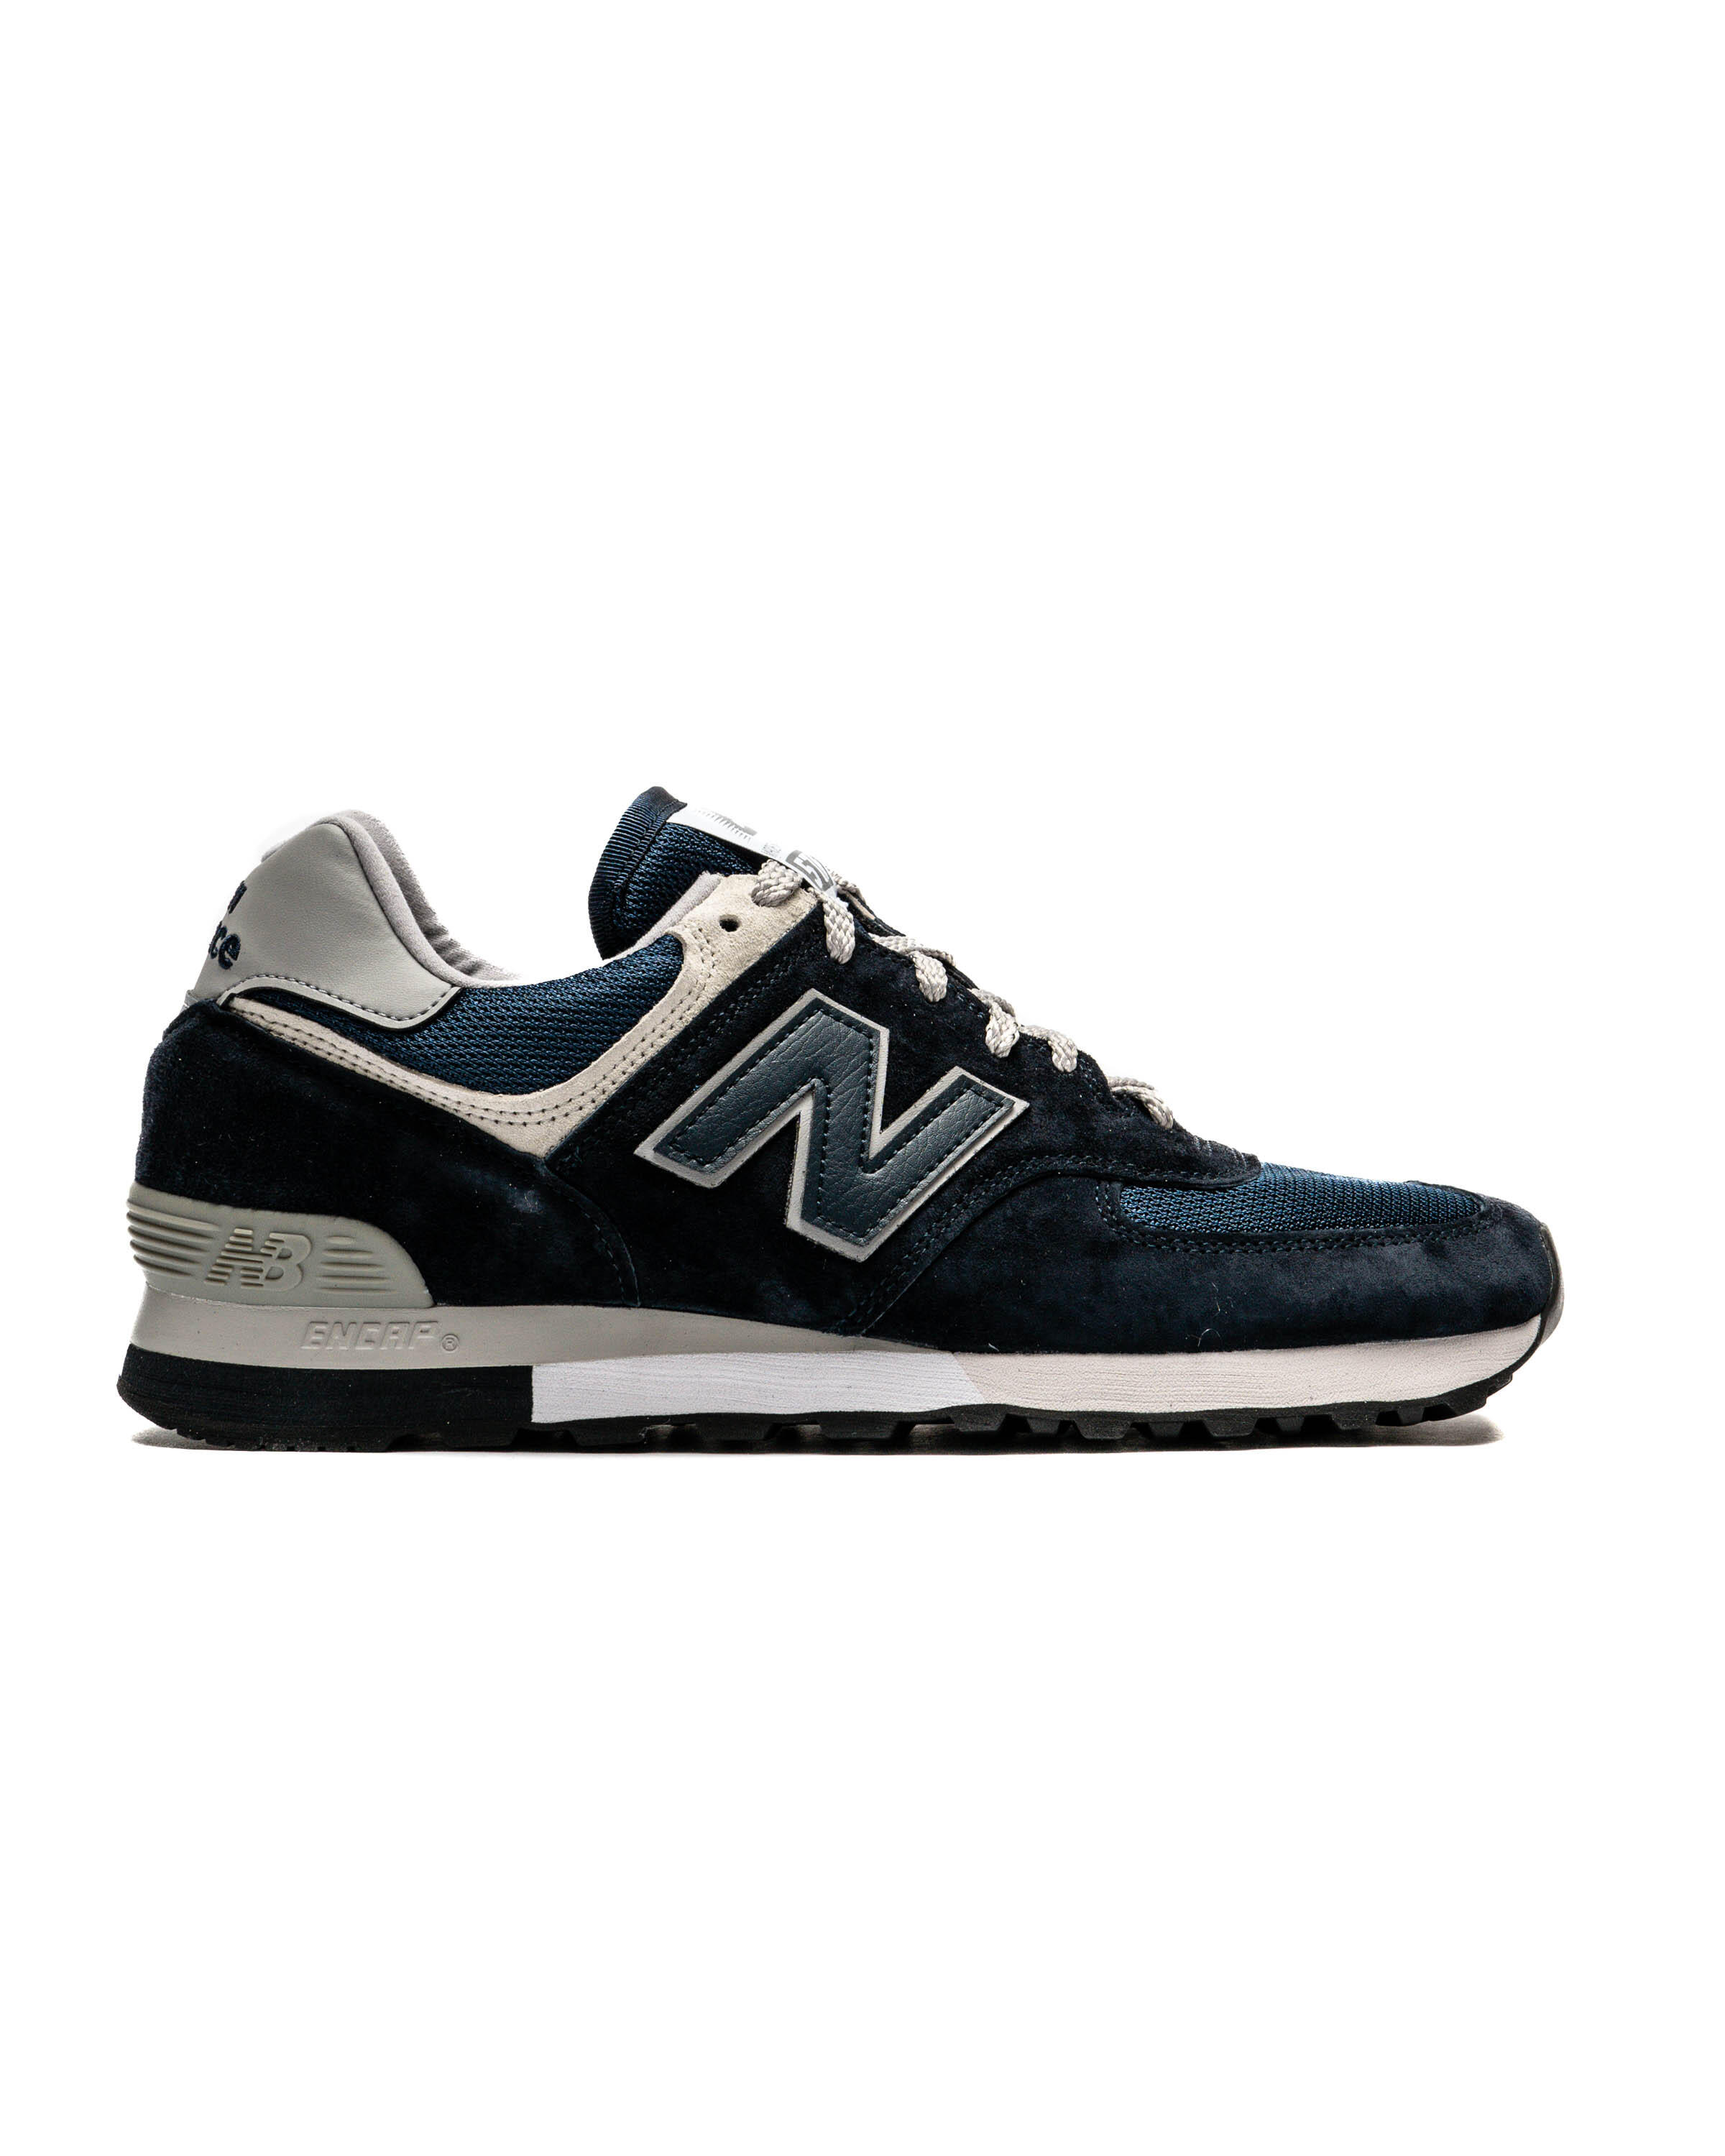 New Balance OU576PNV - Made in England | OU576PNV | AFEW STORE